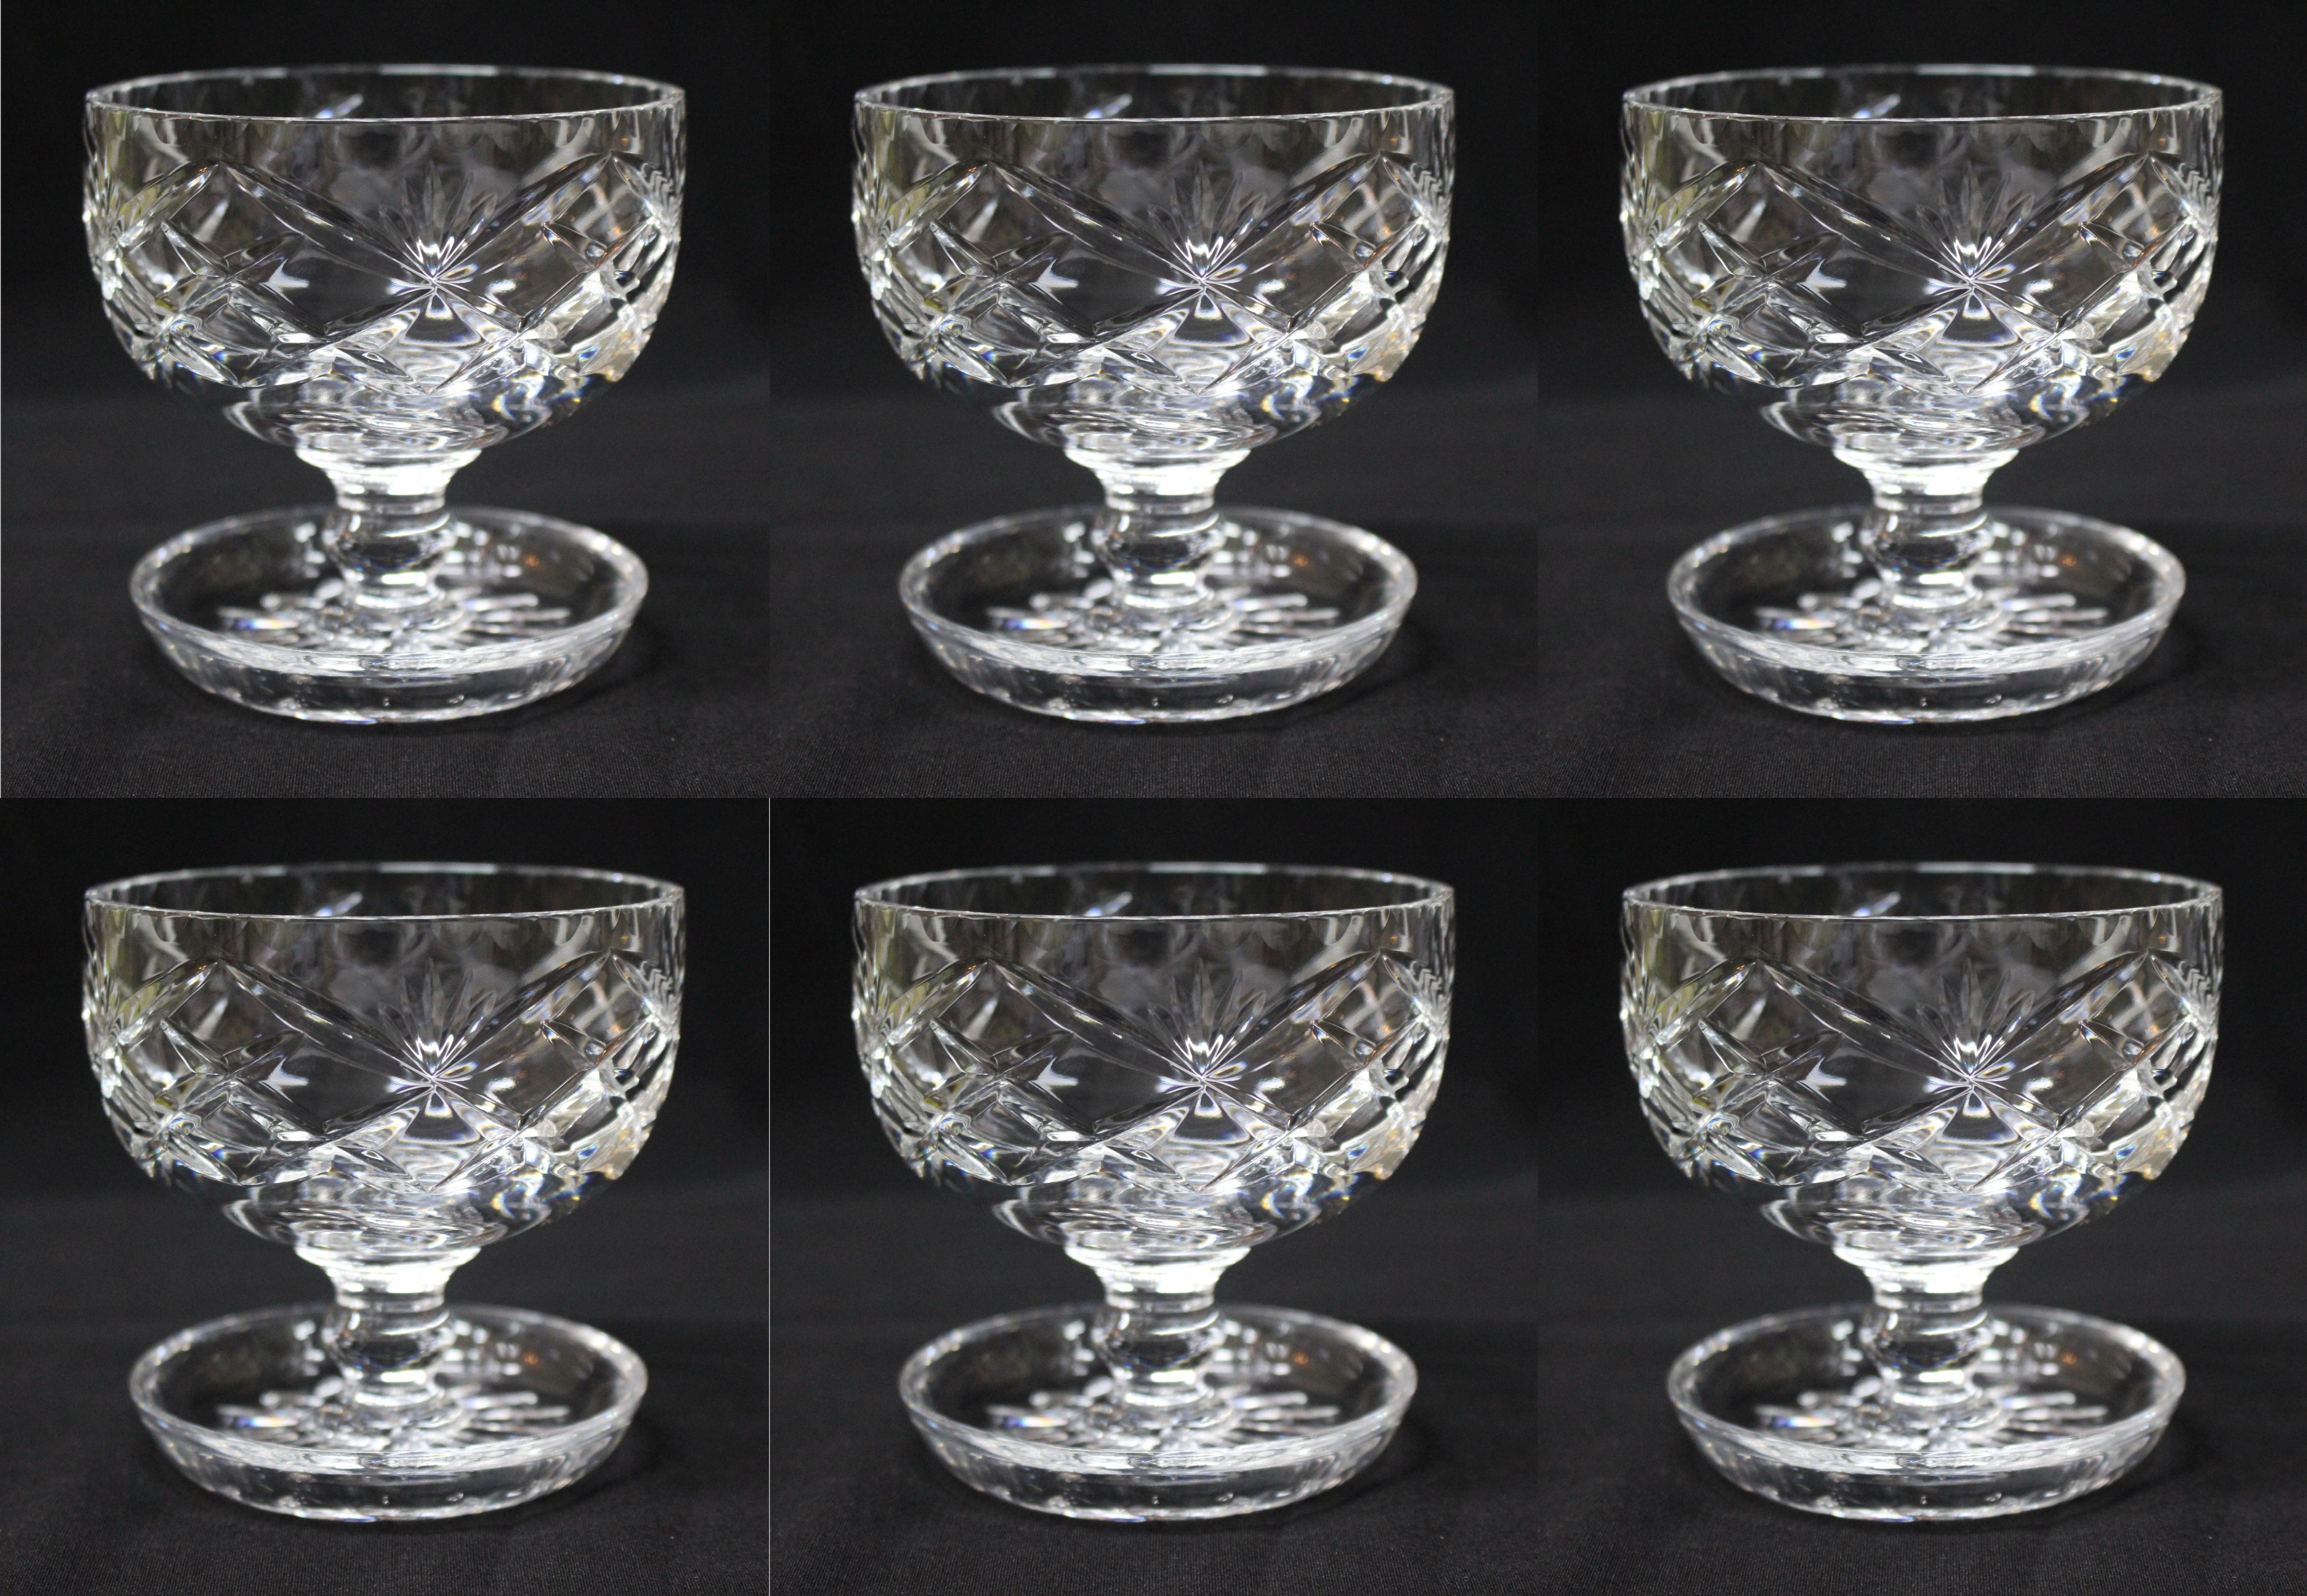 Set of 6 vintage cut glass crystal Sundae dishes


Very nice quality set of 6 fine cut glass sundae dishes

Can be used for desserts, ice cream, prawn cocktails, grapefruit etc.

Manufactured in the famous Stourbridge glassworks in England,